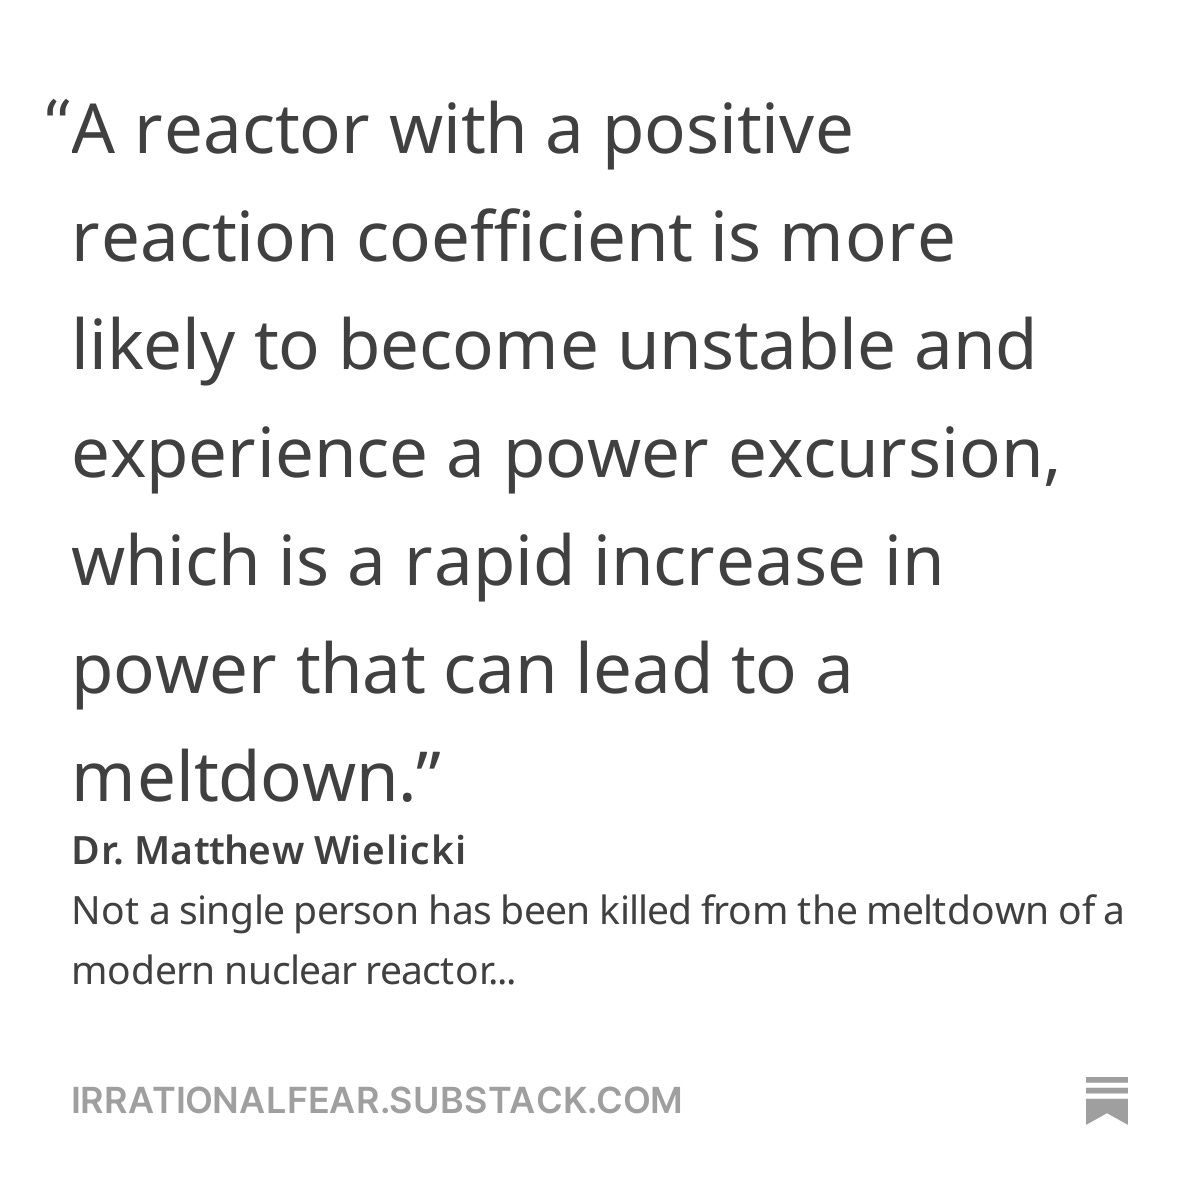 Not a single person has been killed from the meltdown of a modern nuclear reactor... by @MatthewWielicki Read more here: irrationalfear.substack.com/p/not-a-single…